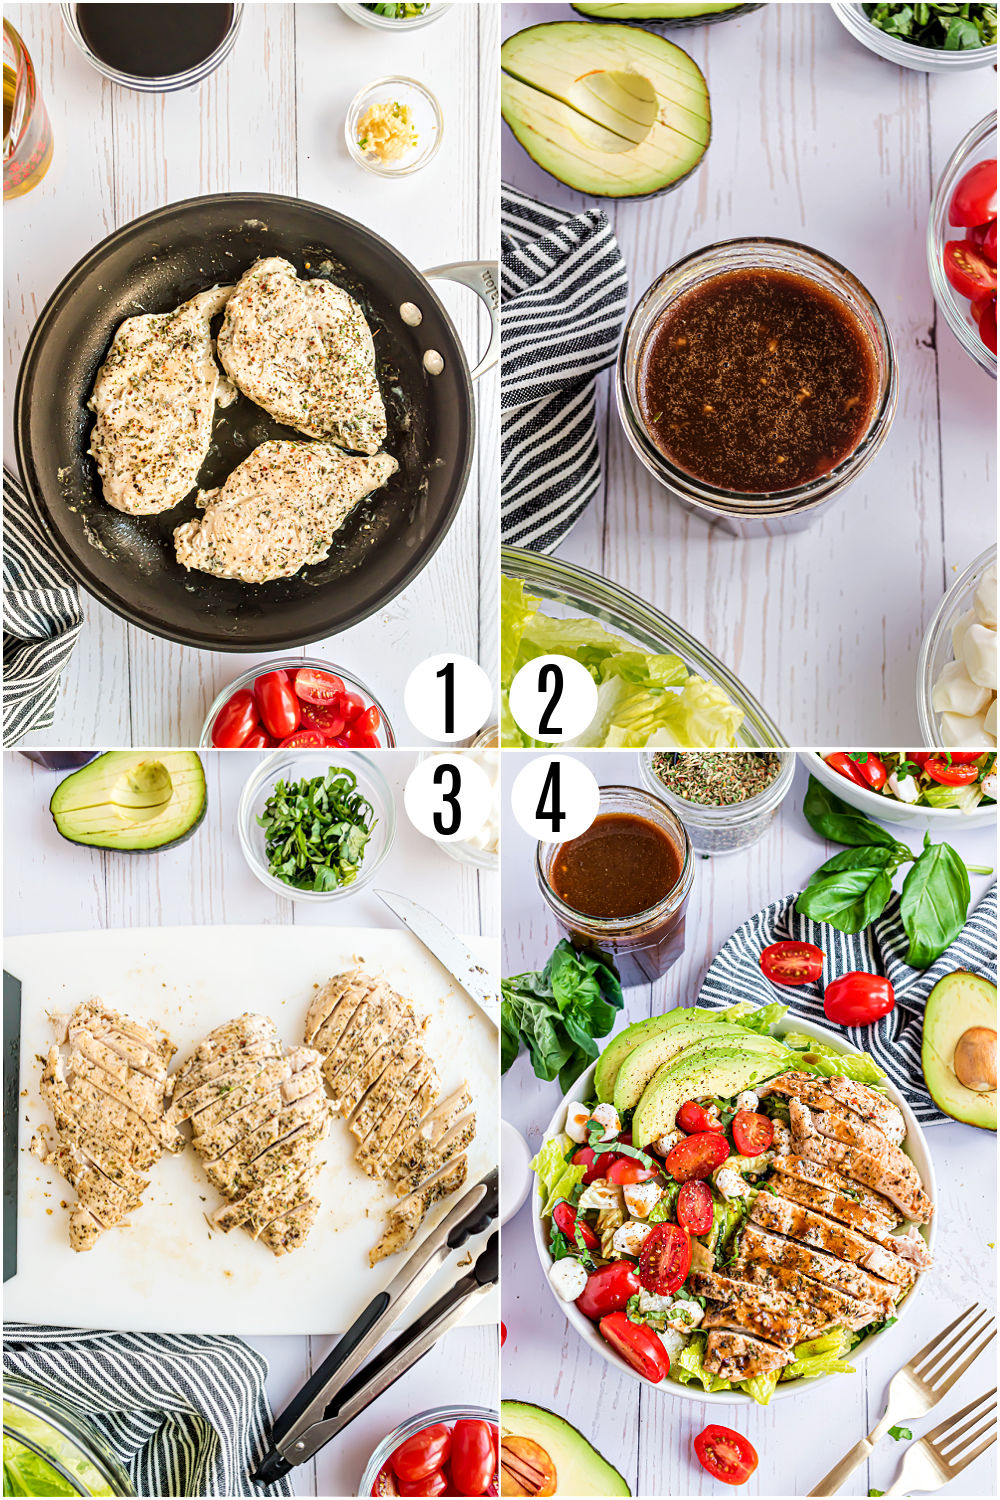 Step by step photos showing how to make chicken caprese salad.